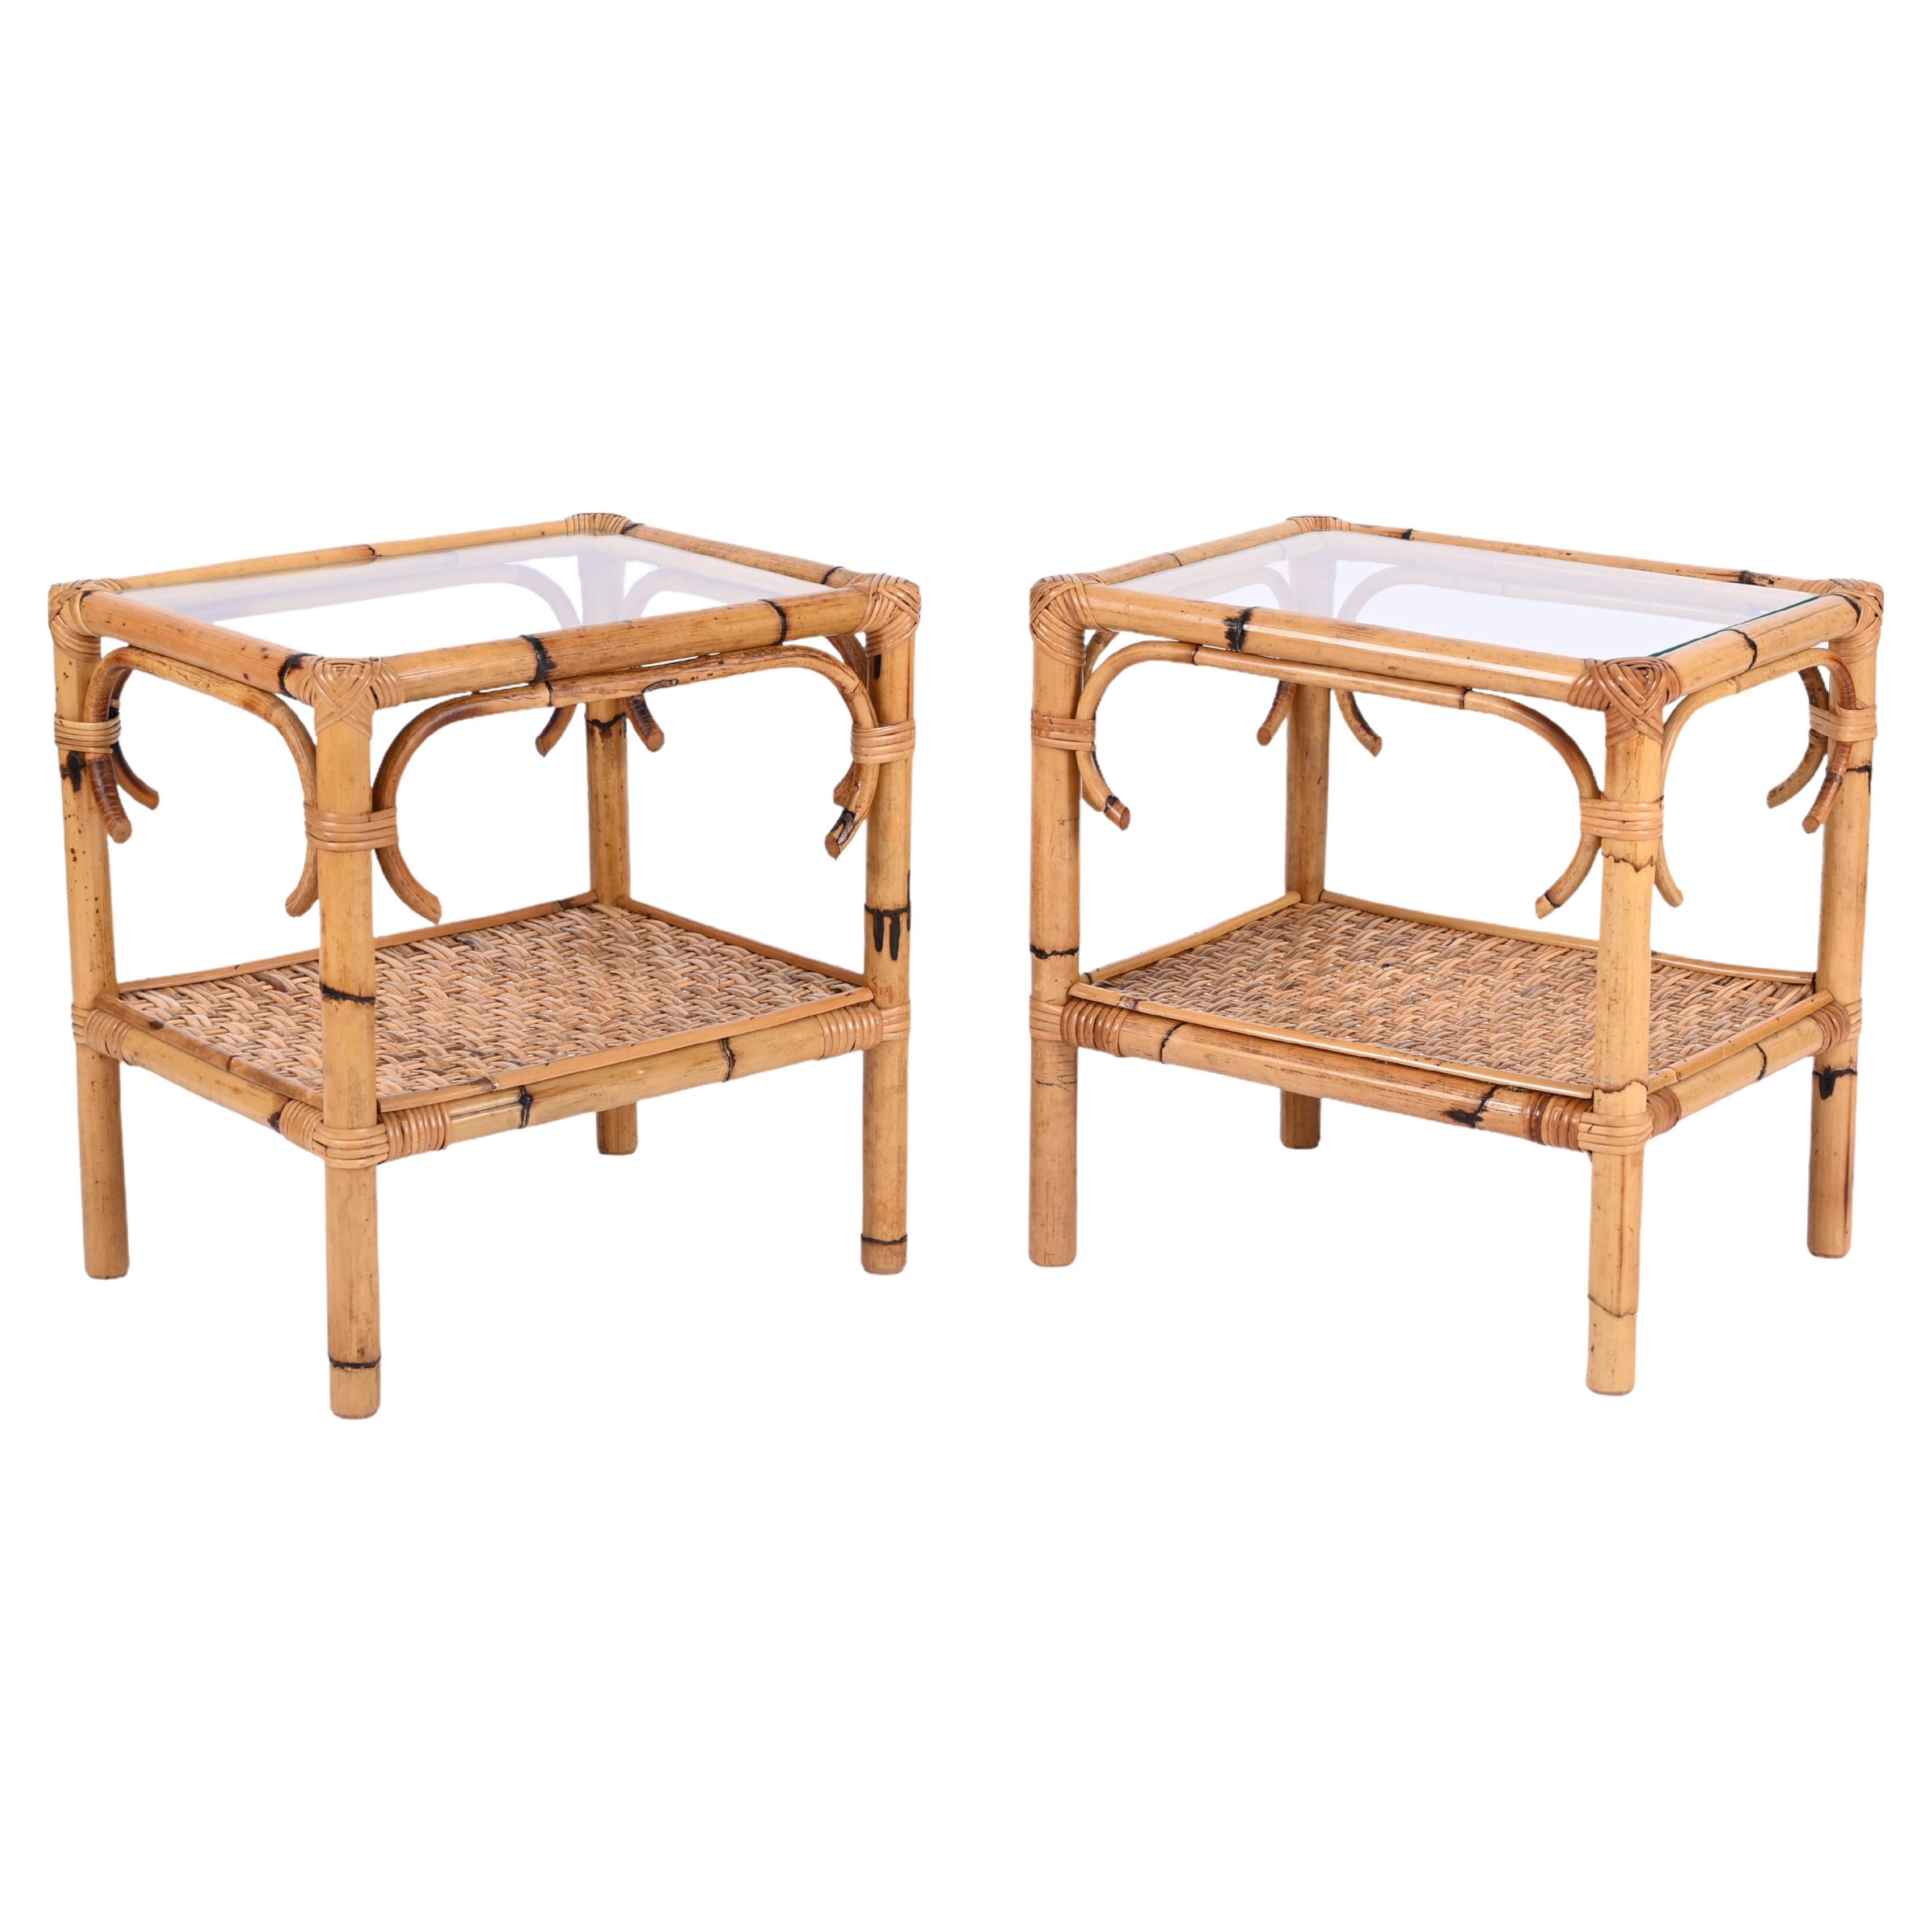 Pair of Mid-Century Modern Bamboo Rattan and Glass Italian Bedside Tables, 1970s